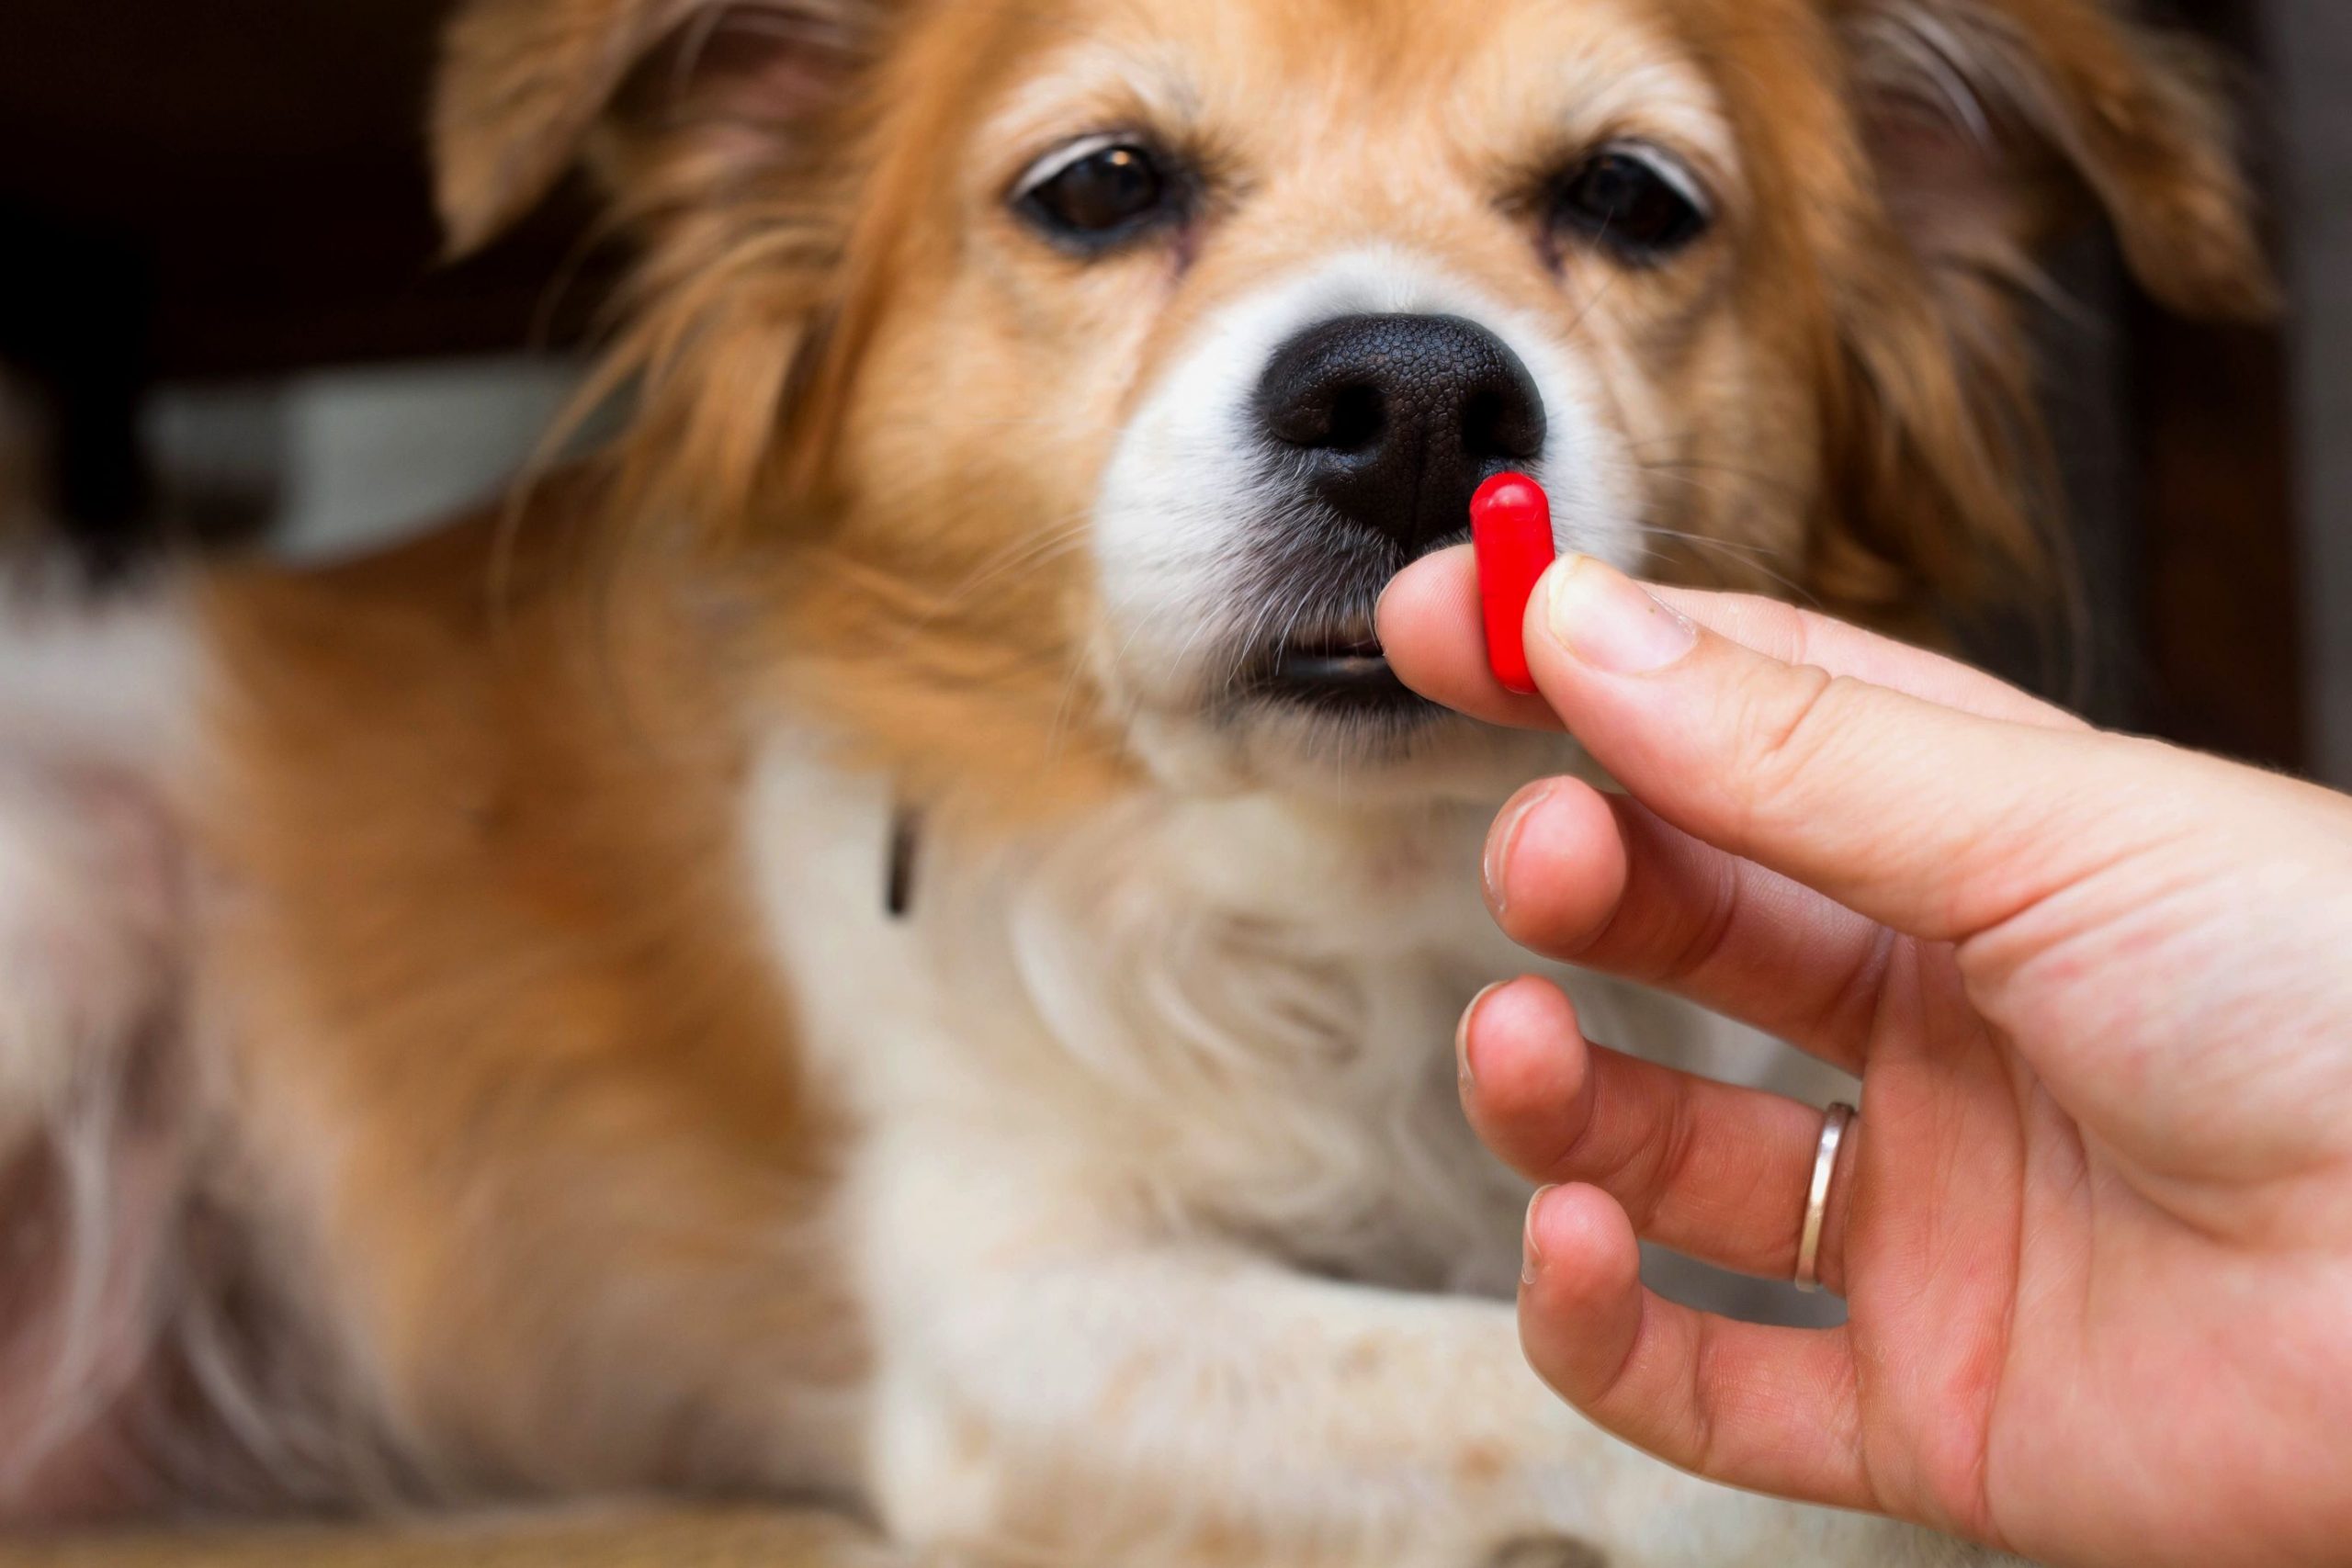 A Spoonful of Sugar? Giving Your Pet Medication